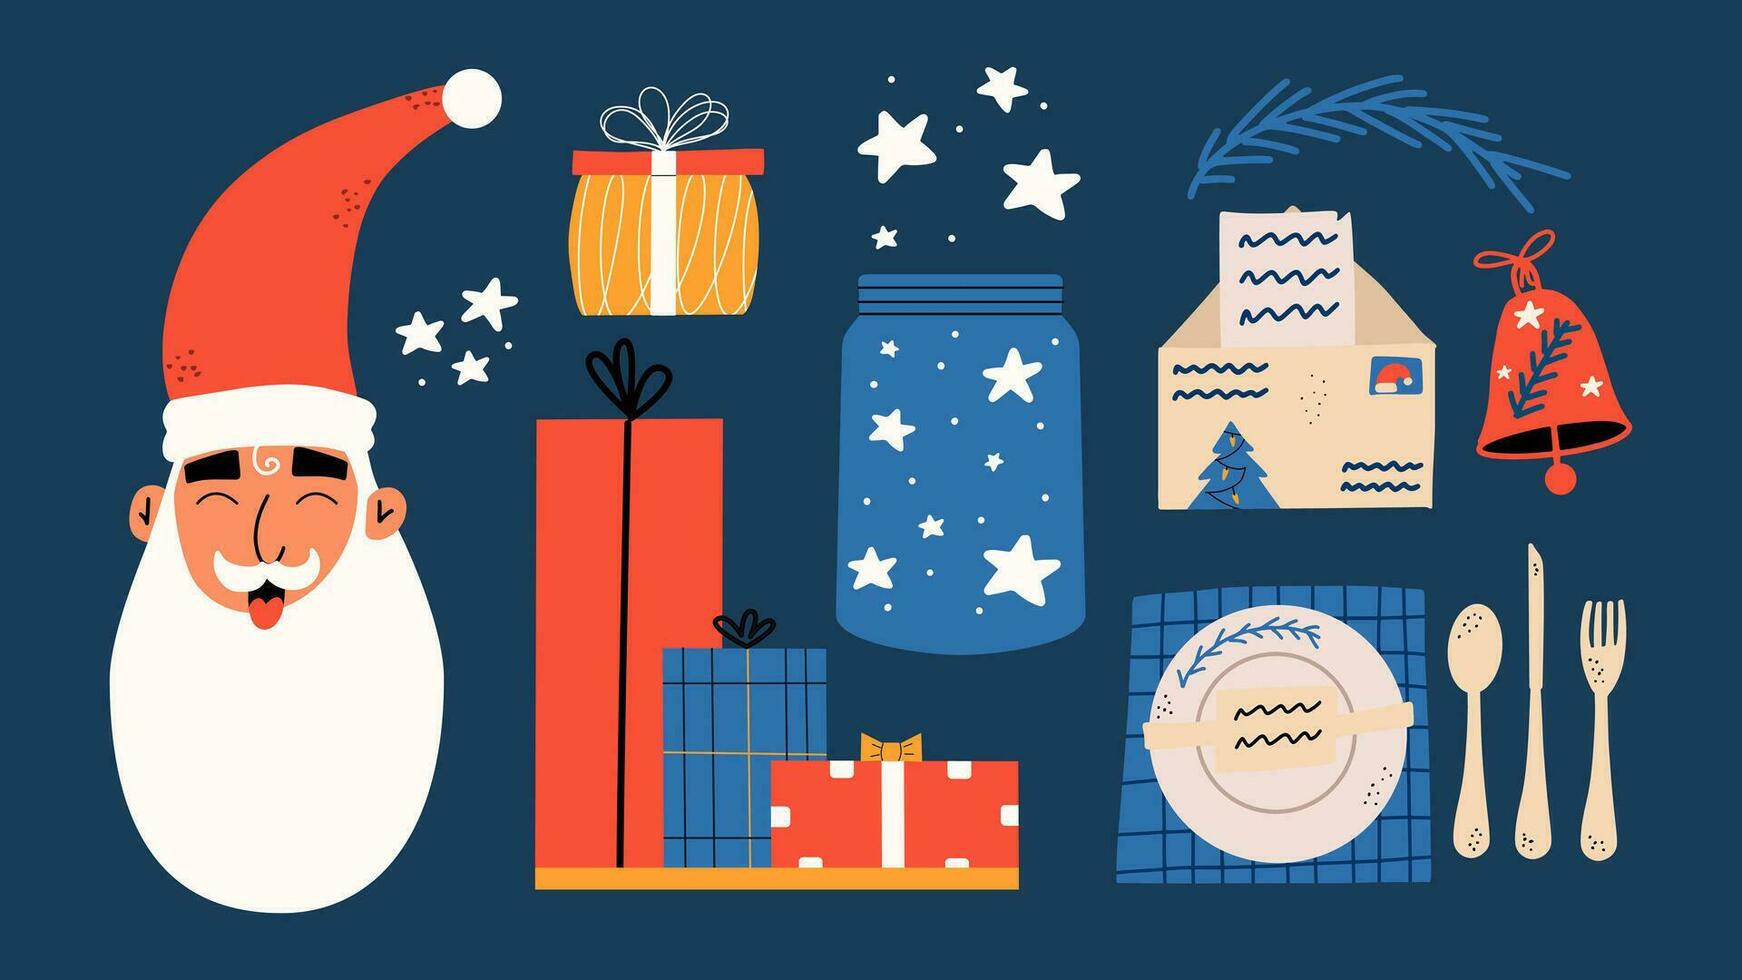 Christmas set. Santa, table setting, gift boxes, bell, jar with stars. Hand draw illustration vector